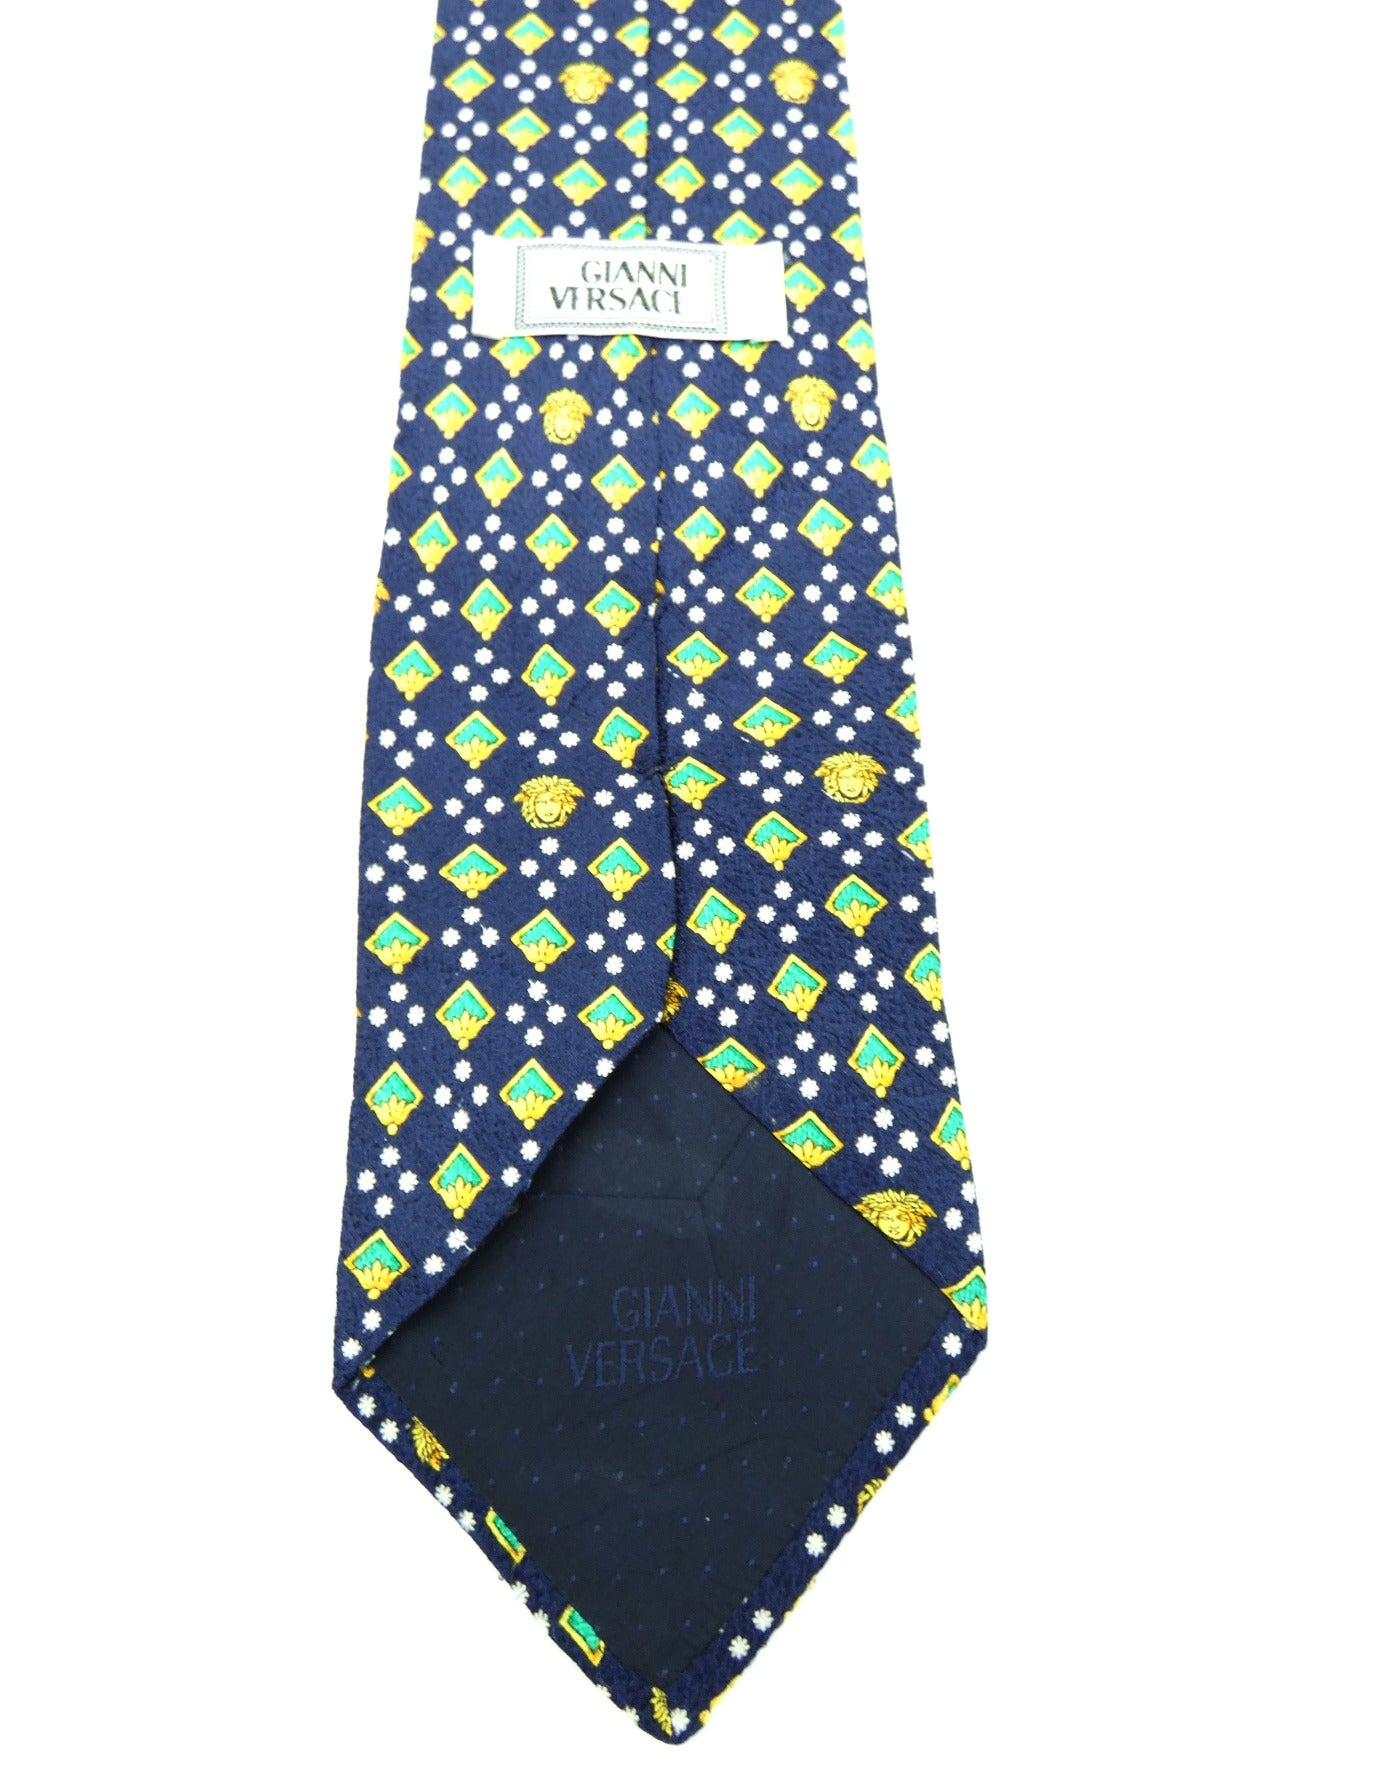 Gianni Versace Graphic Blue Green and Gold Medusa Graphic Silk Tie Ties Gianni Versace